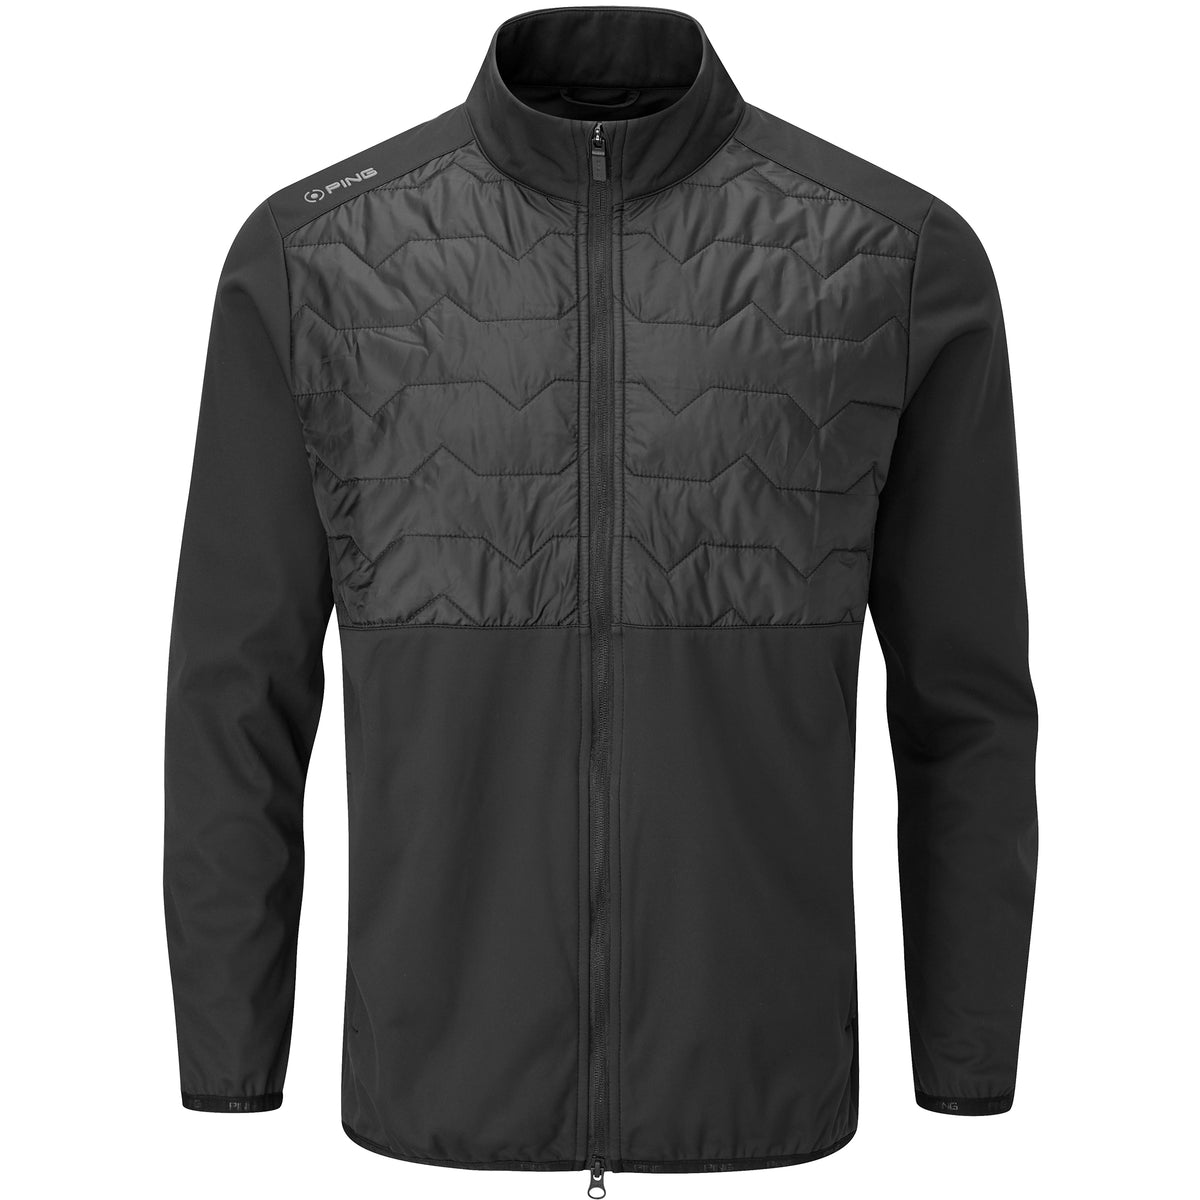 PING Norse S2 Zoned Jacket — The House of Golf